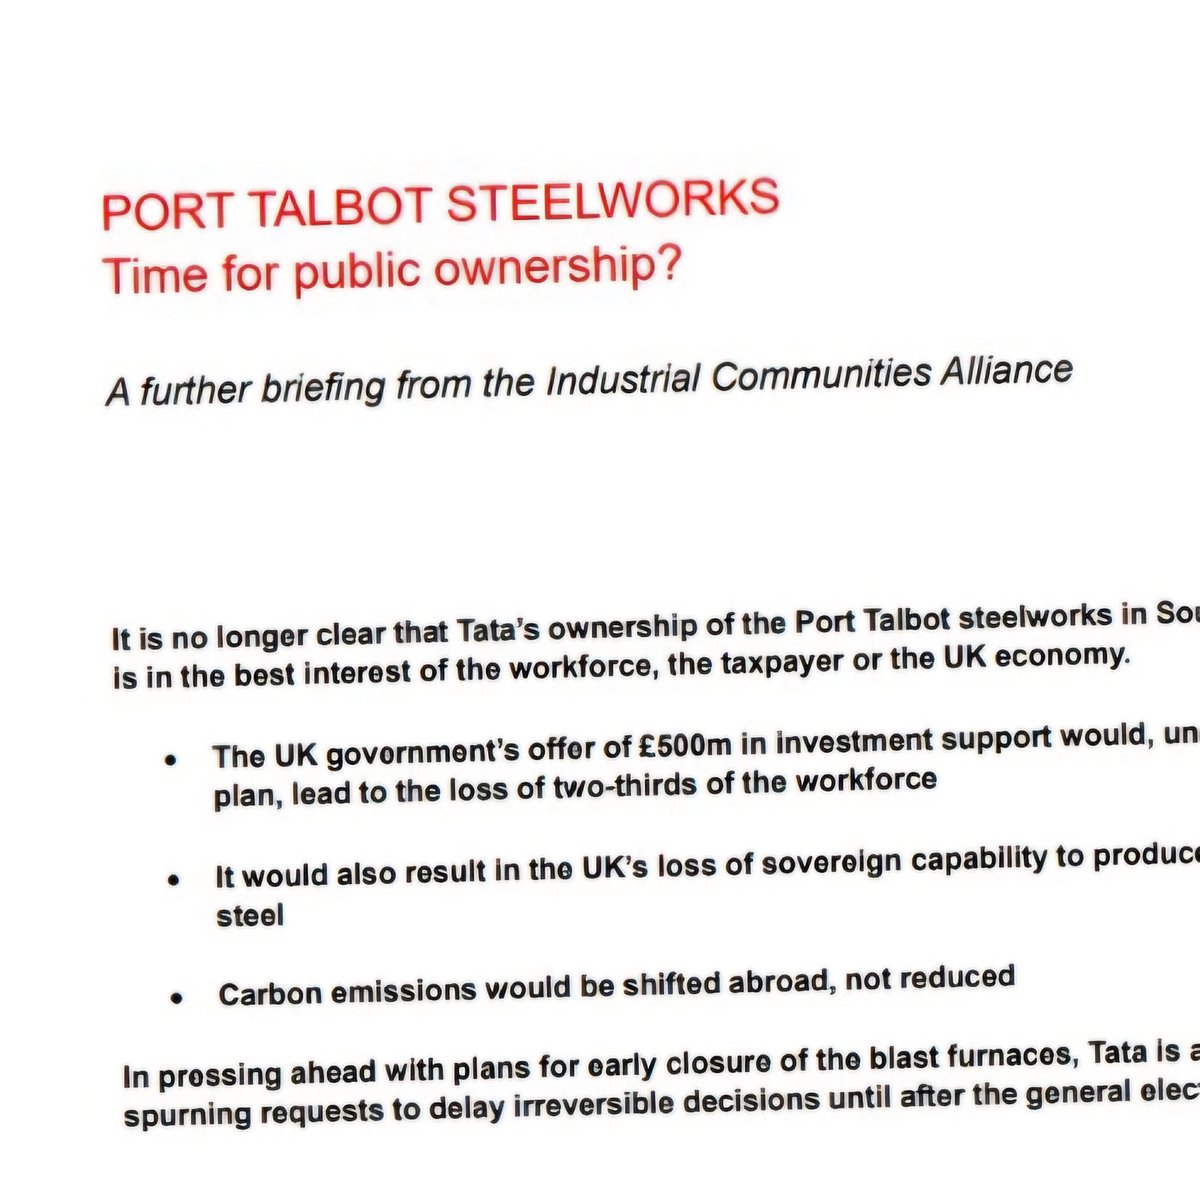 The Conservatives are giving Tata Steel £500m but Port Talbot will lose 2800 jobs.

Rather than give money and jobs away, the Govt could take over the plant, as a new briefing advocates.

Public ownership would buy time to put in place an alternative plan.

#PortTalbot #TataSteel